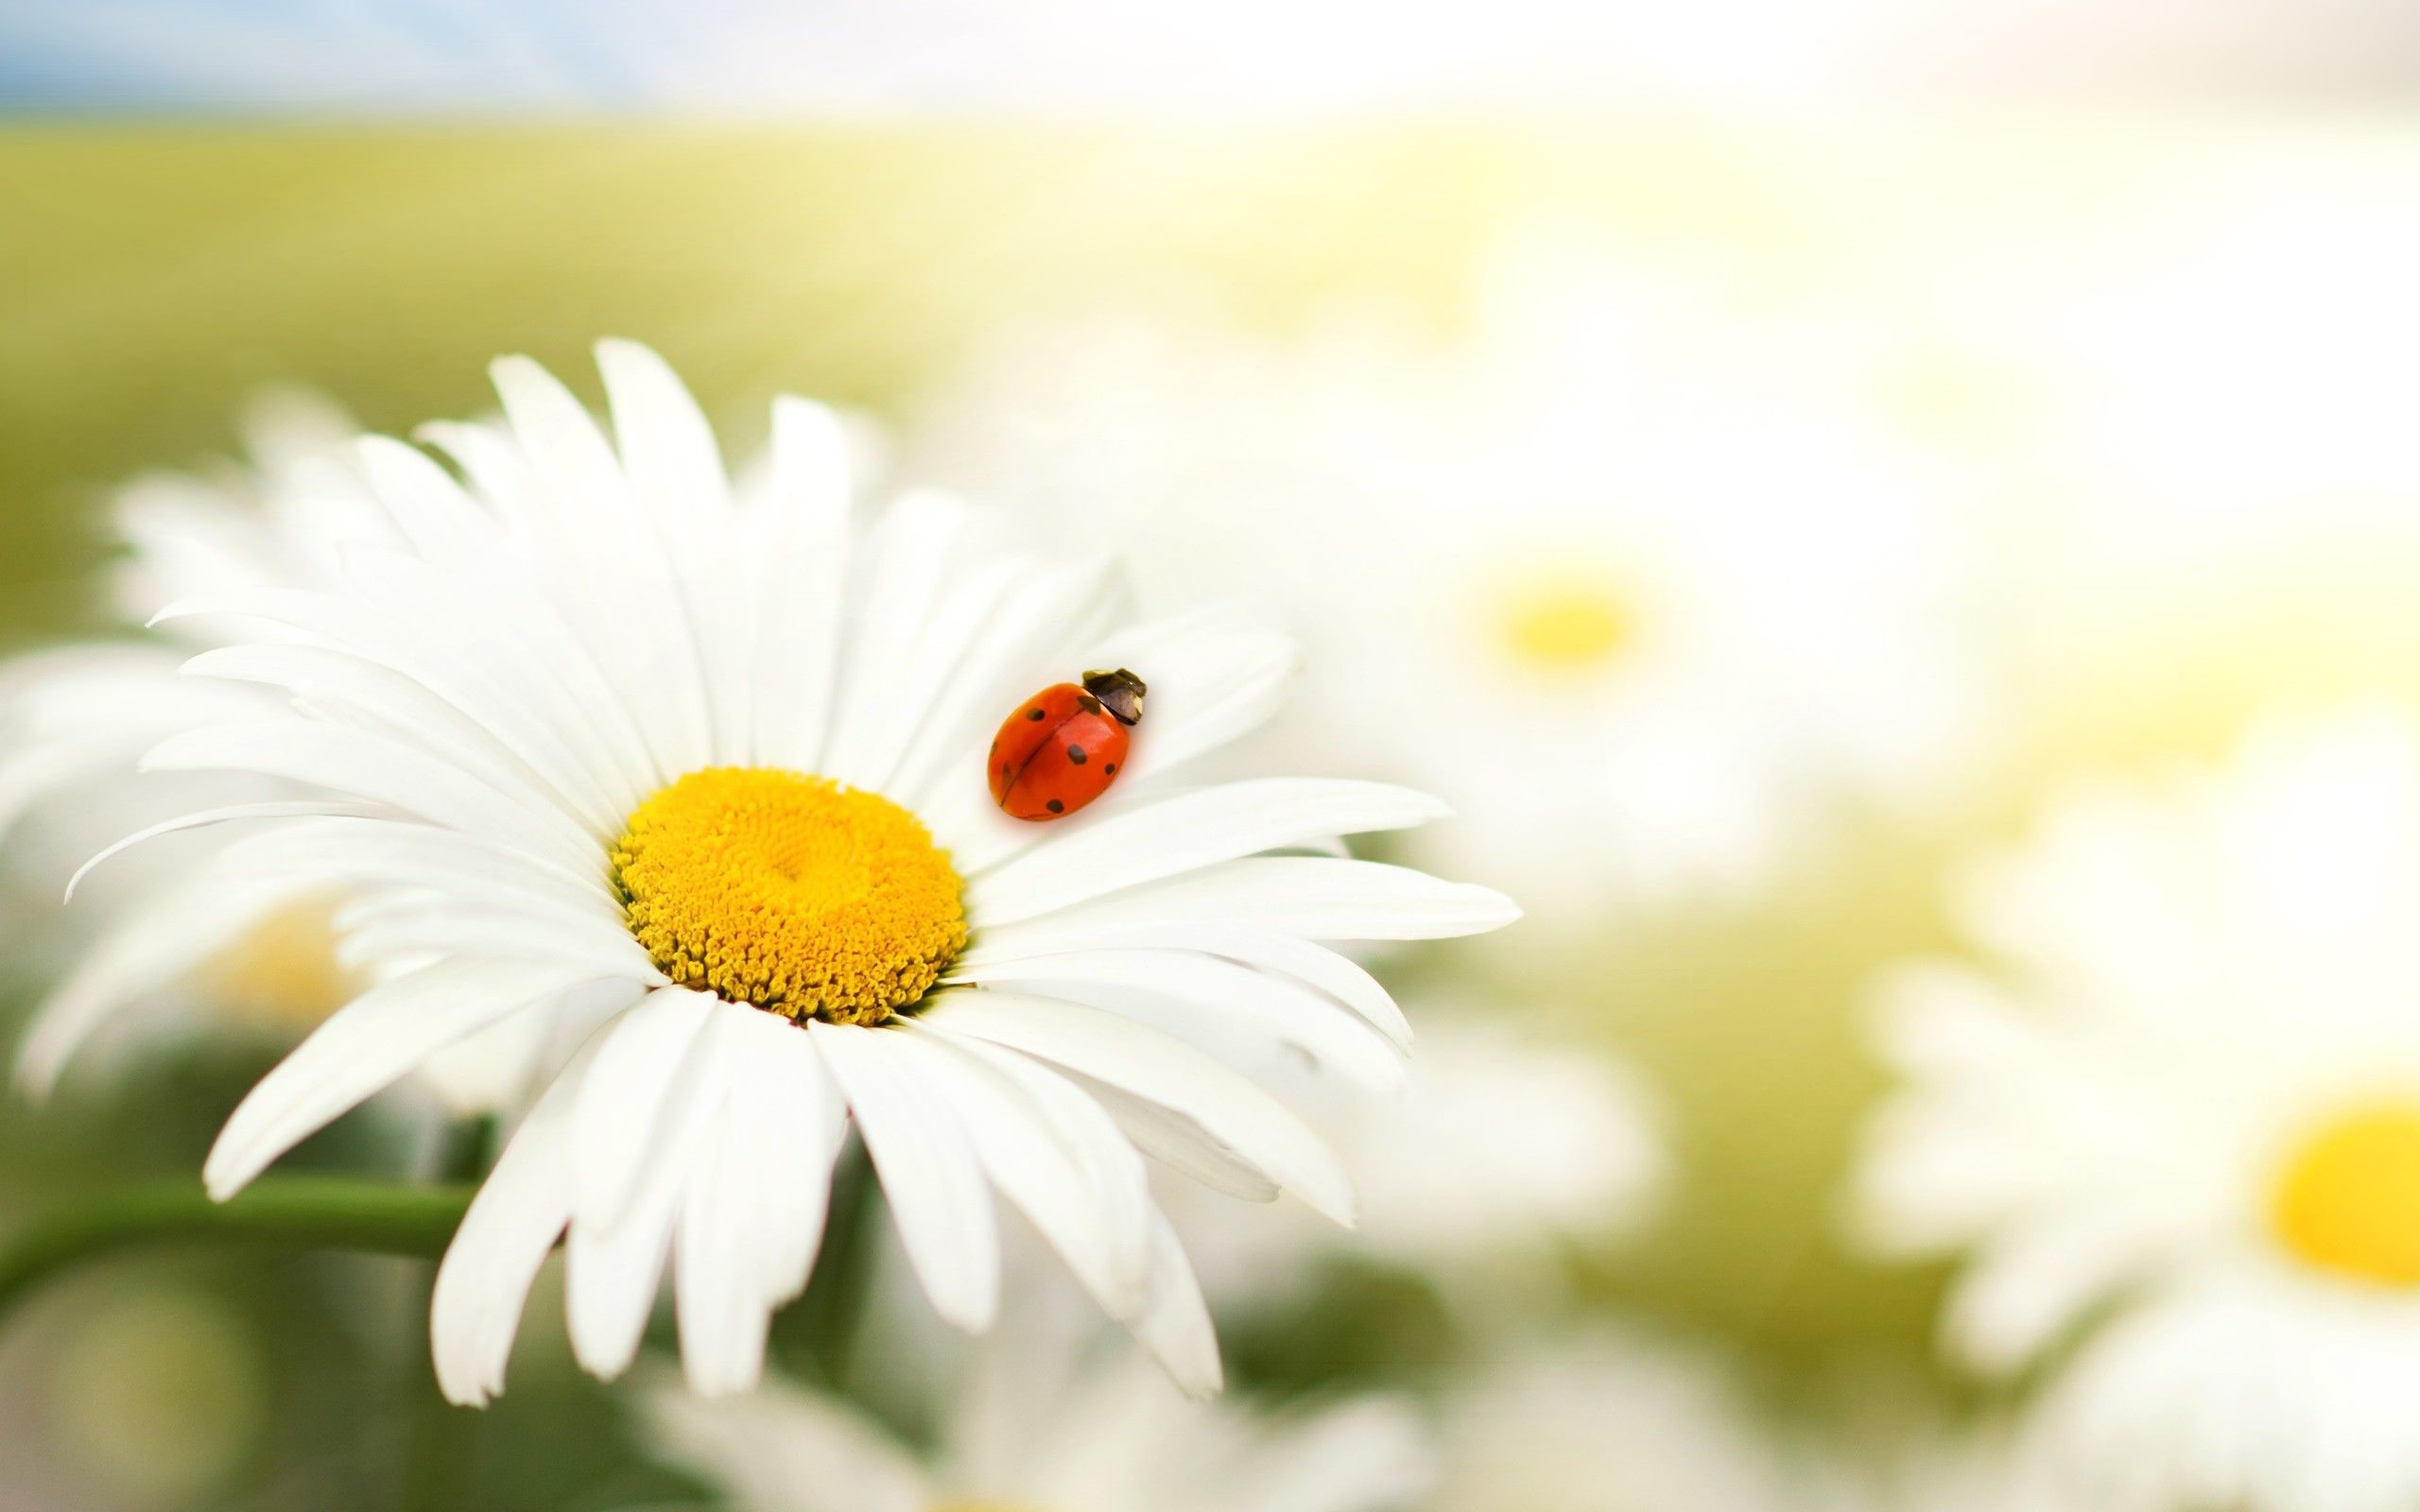 2560x1600 Daisy / Ladybug Daisy Flower Photos, Pictures Of Spring Flowers, Spring  Flowers Wallpaper,